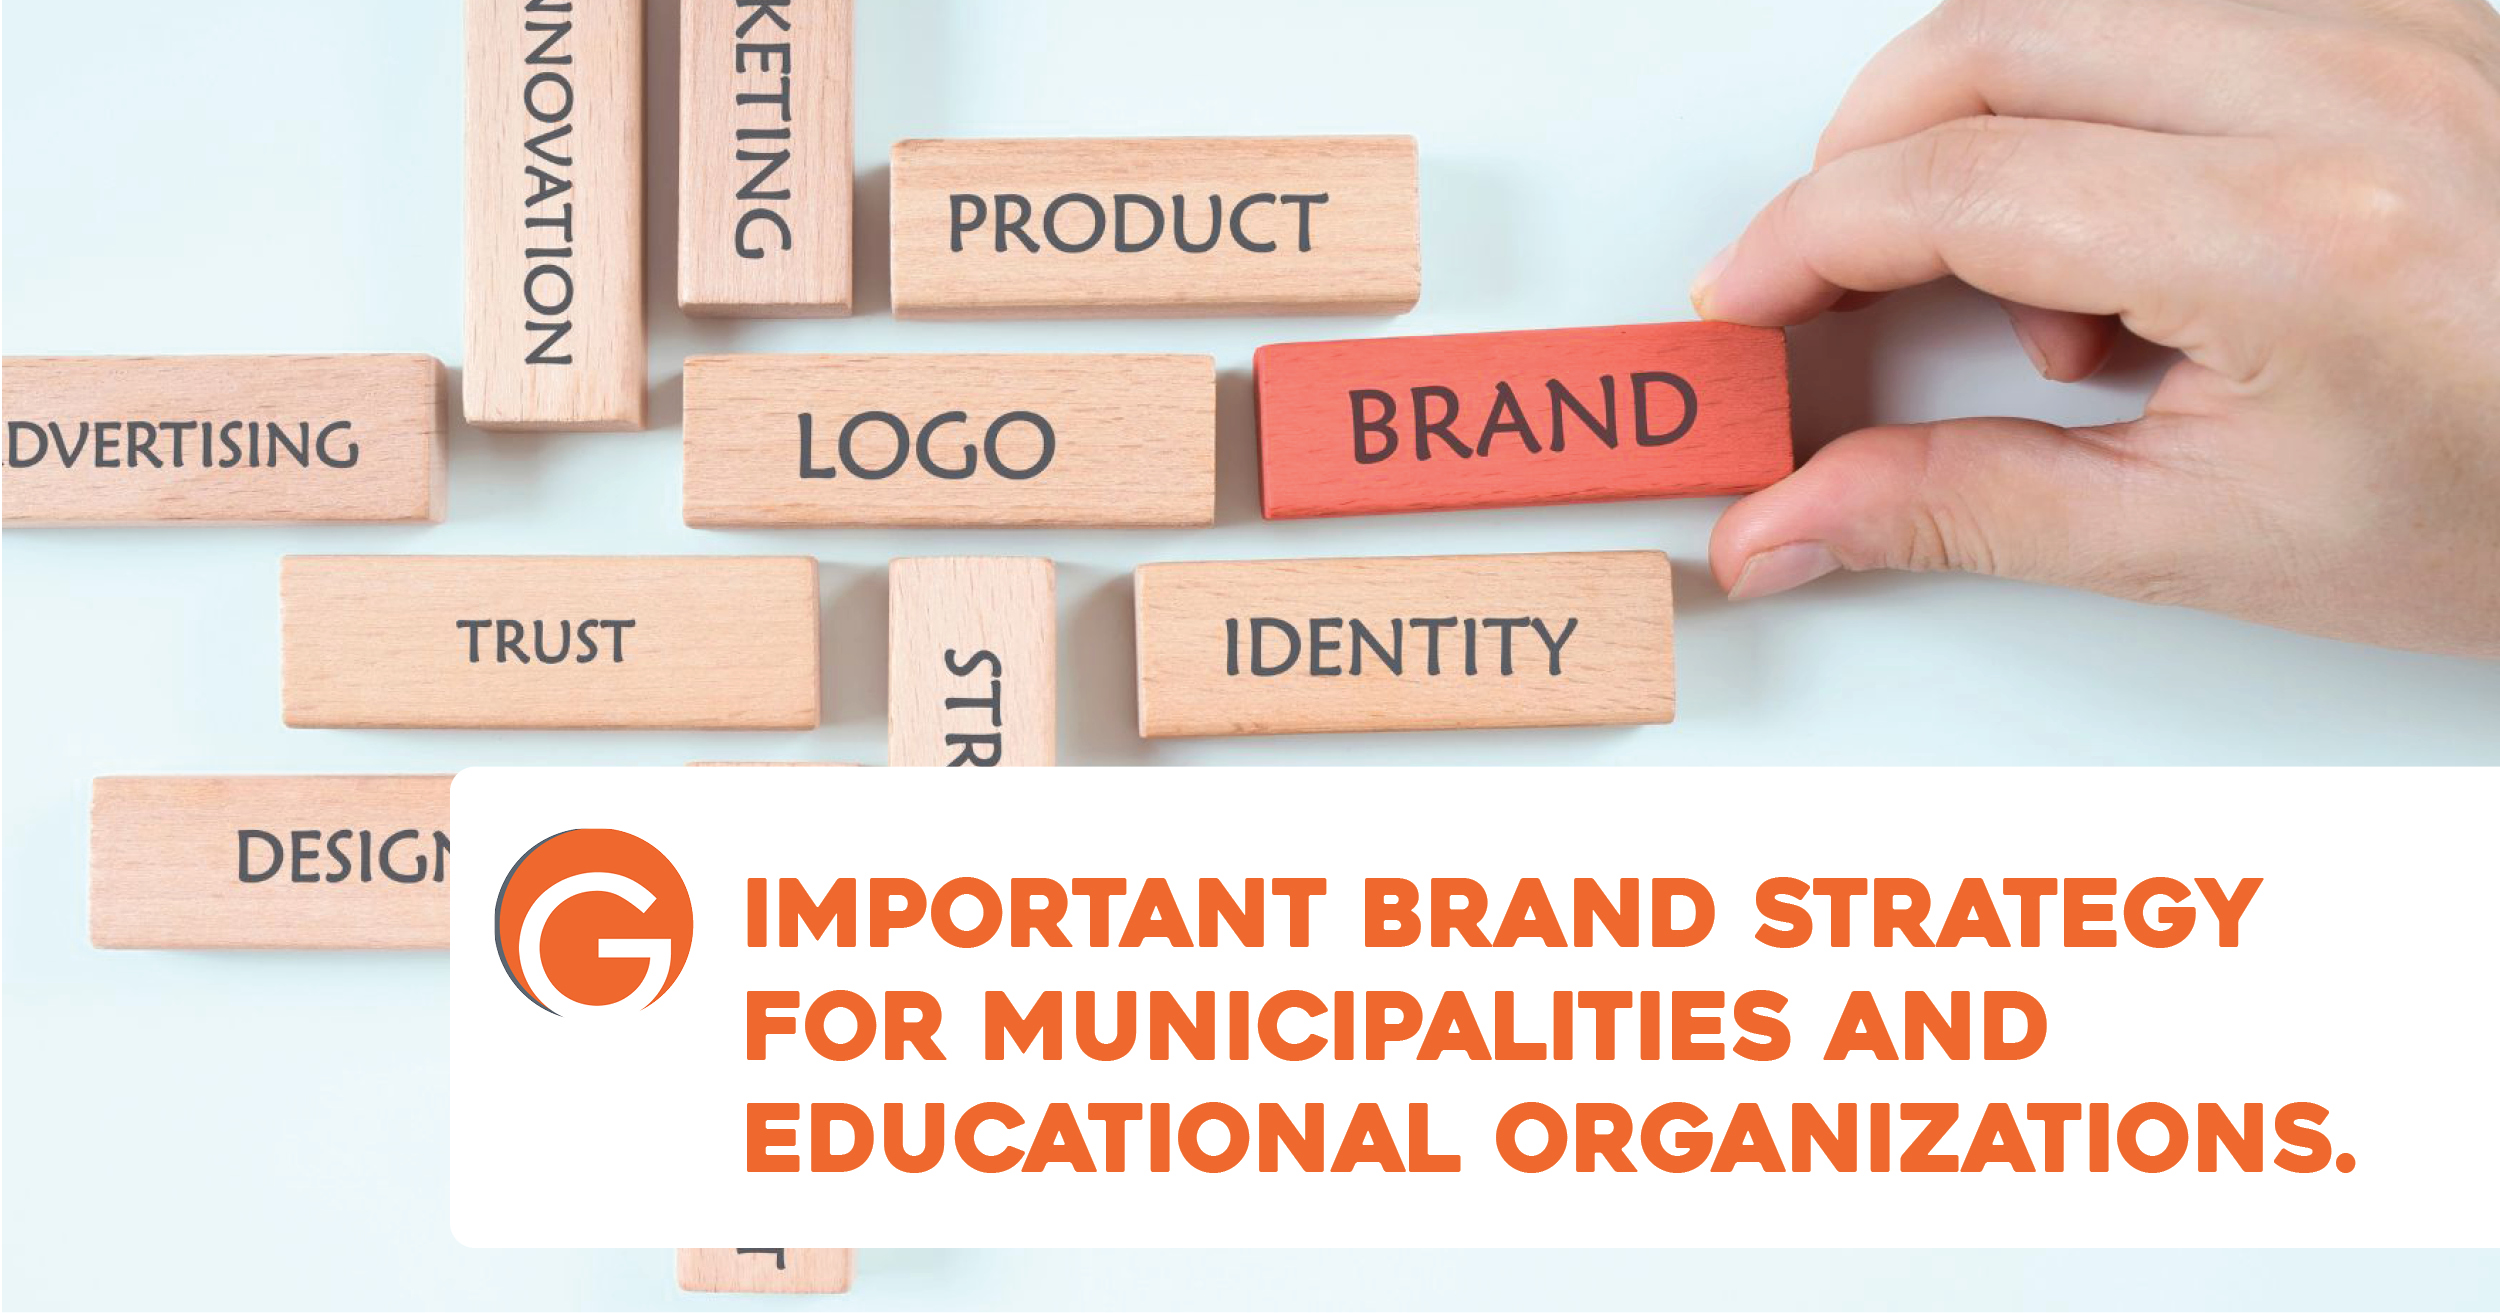 Important brand strategy for municipalities and educational organizations